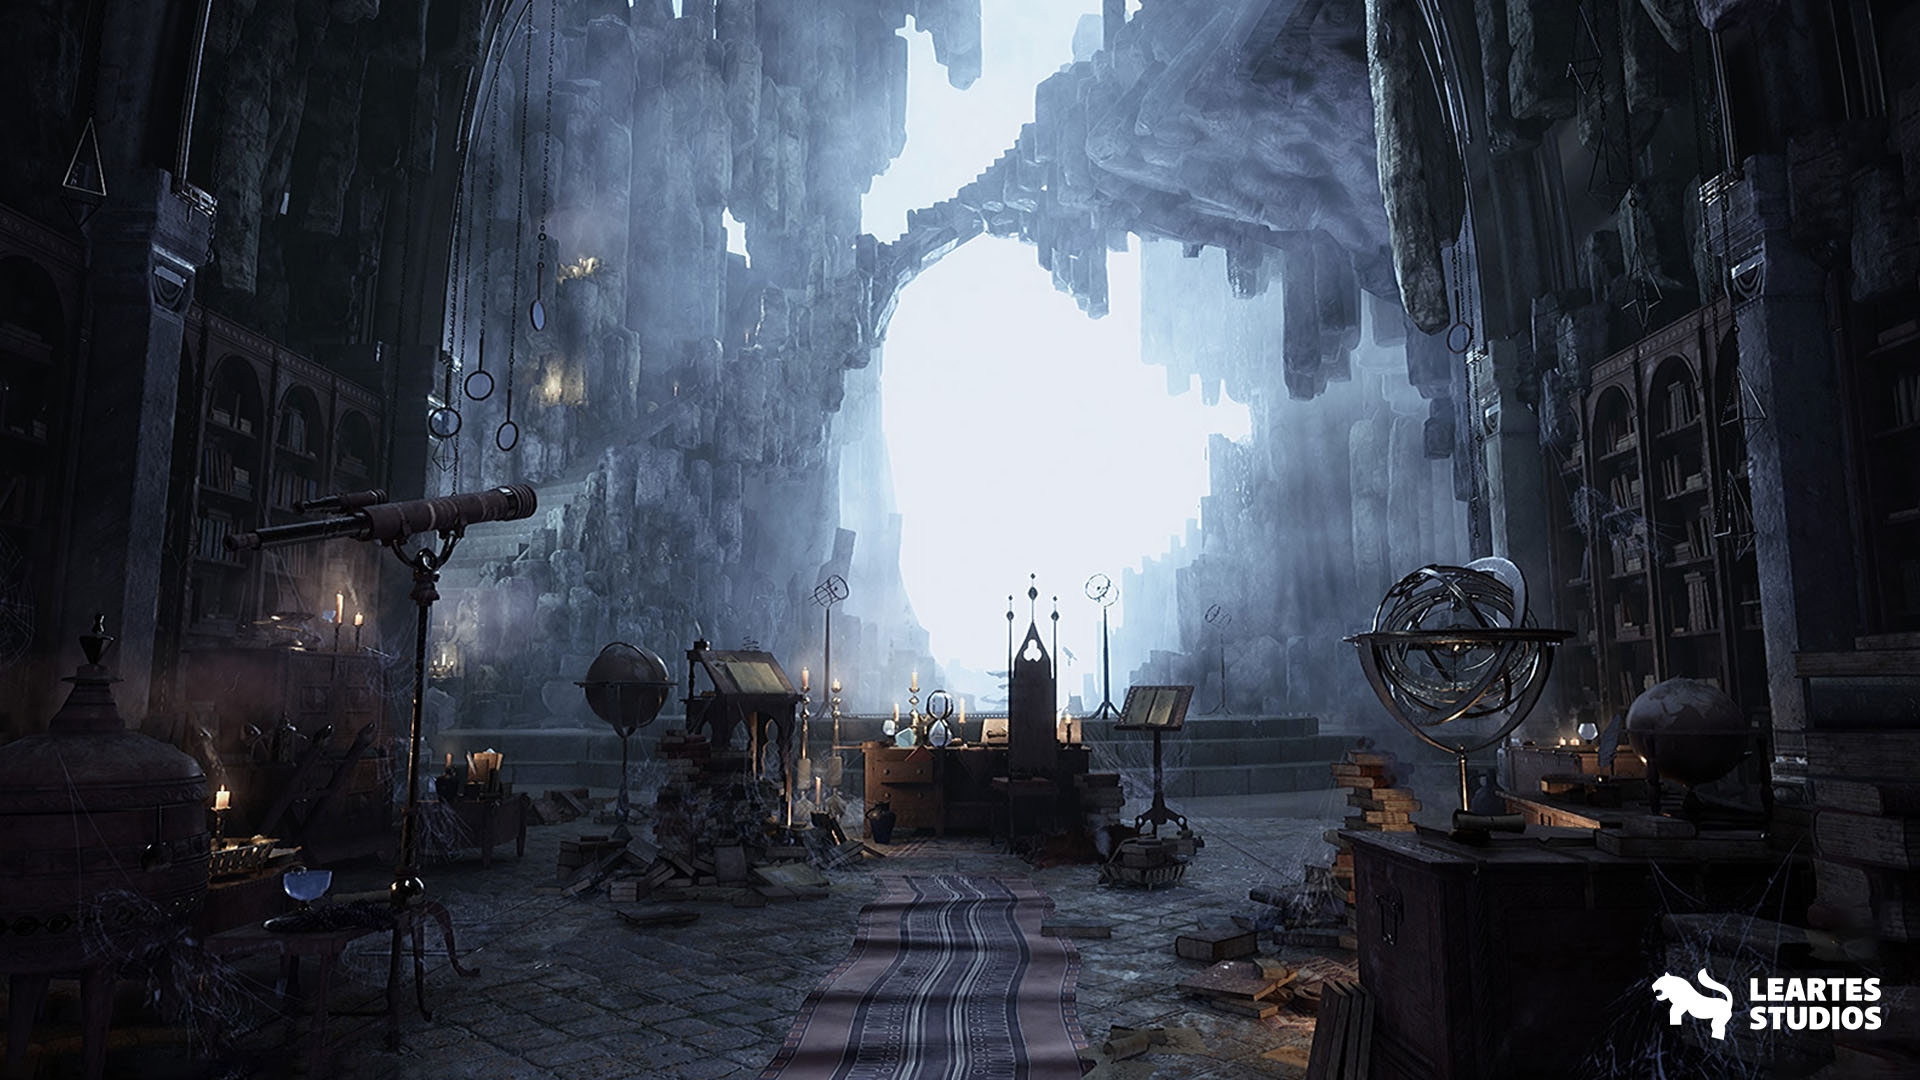 Merlin's Cave Environment